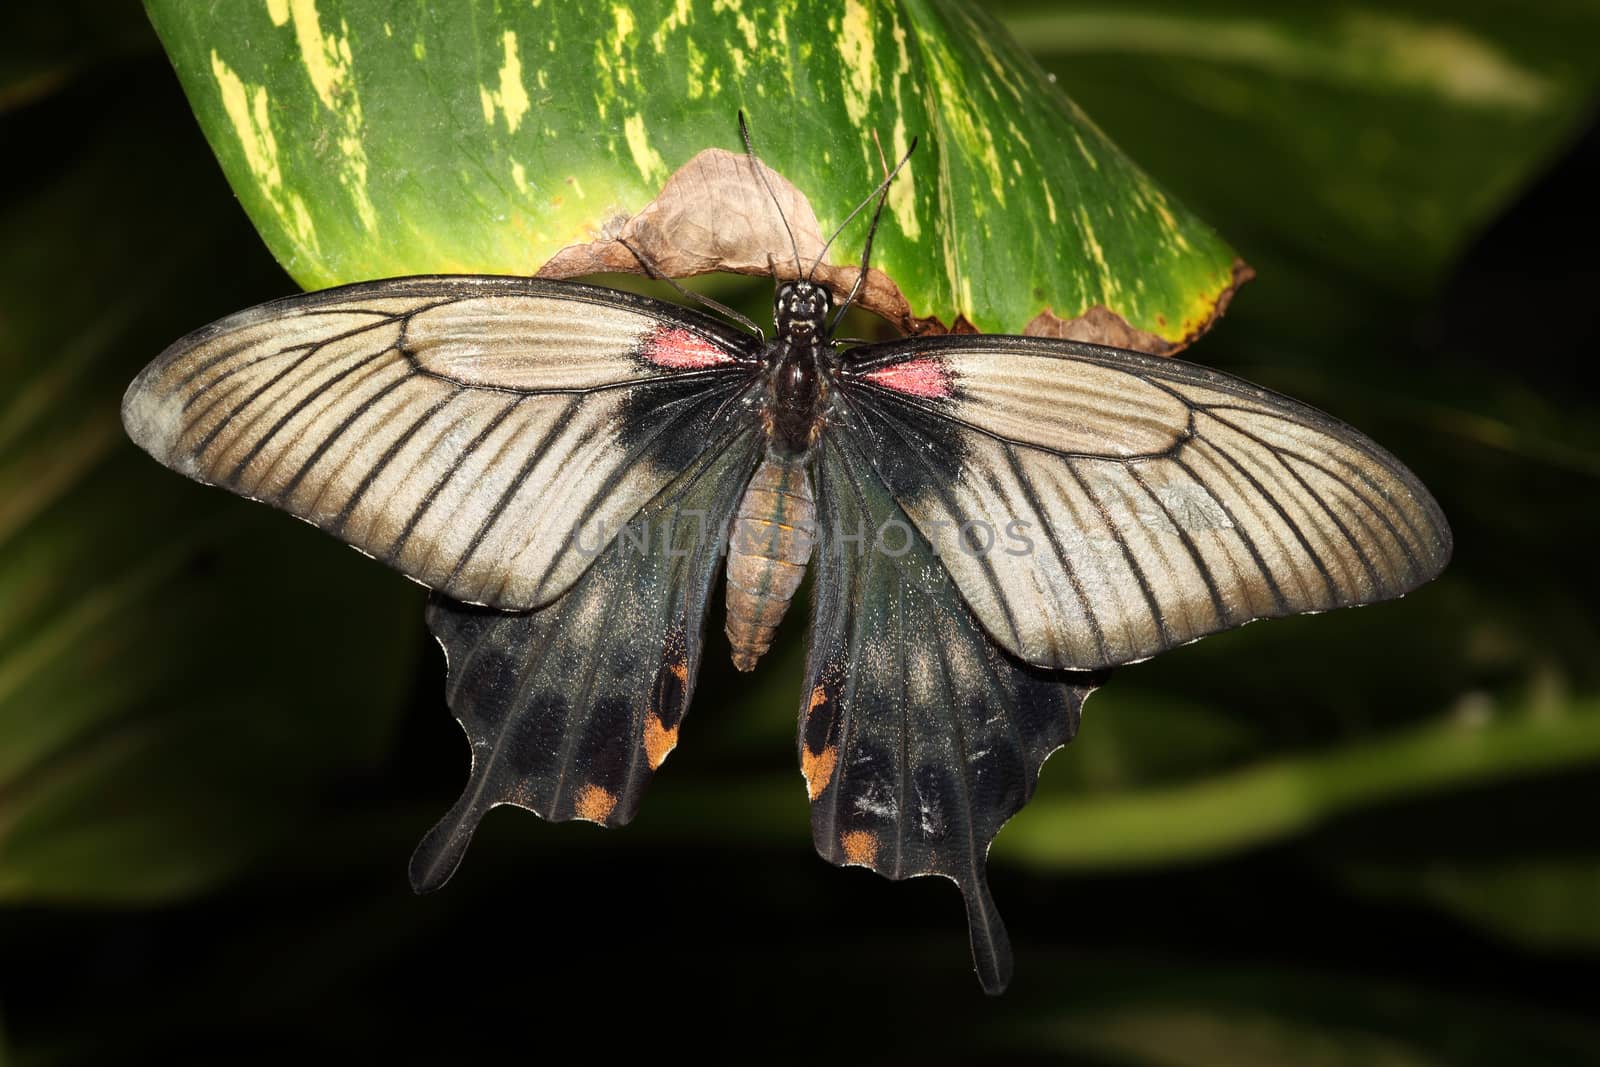 Tropical swallowtail butterfly resting on a green leaf stock photo